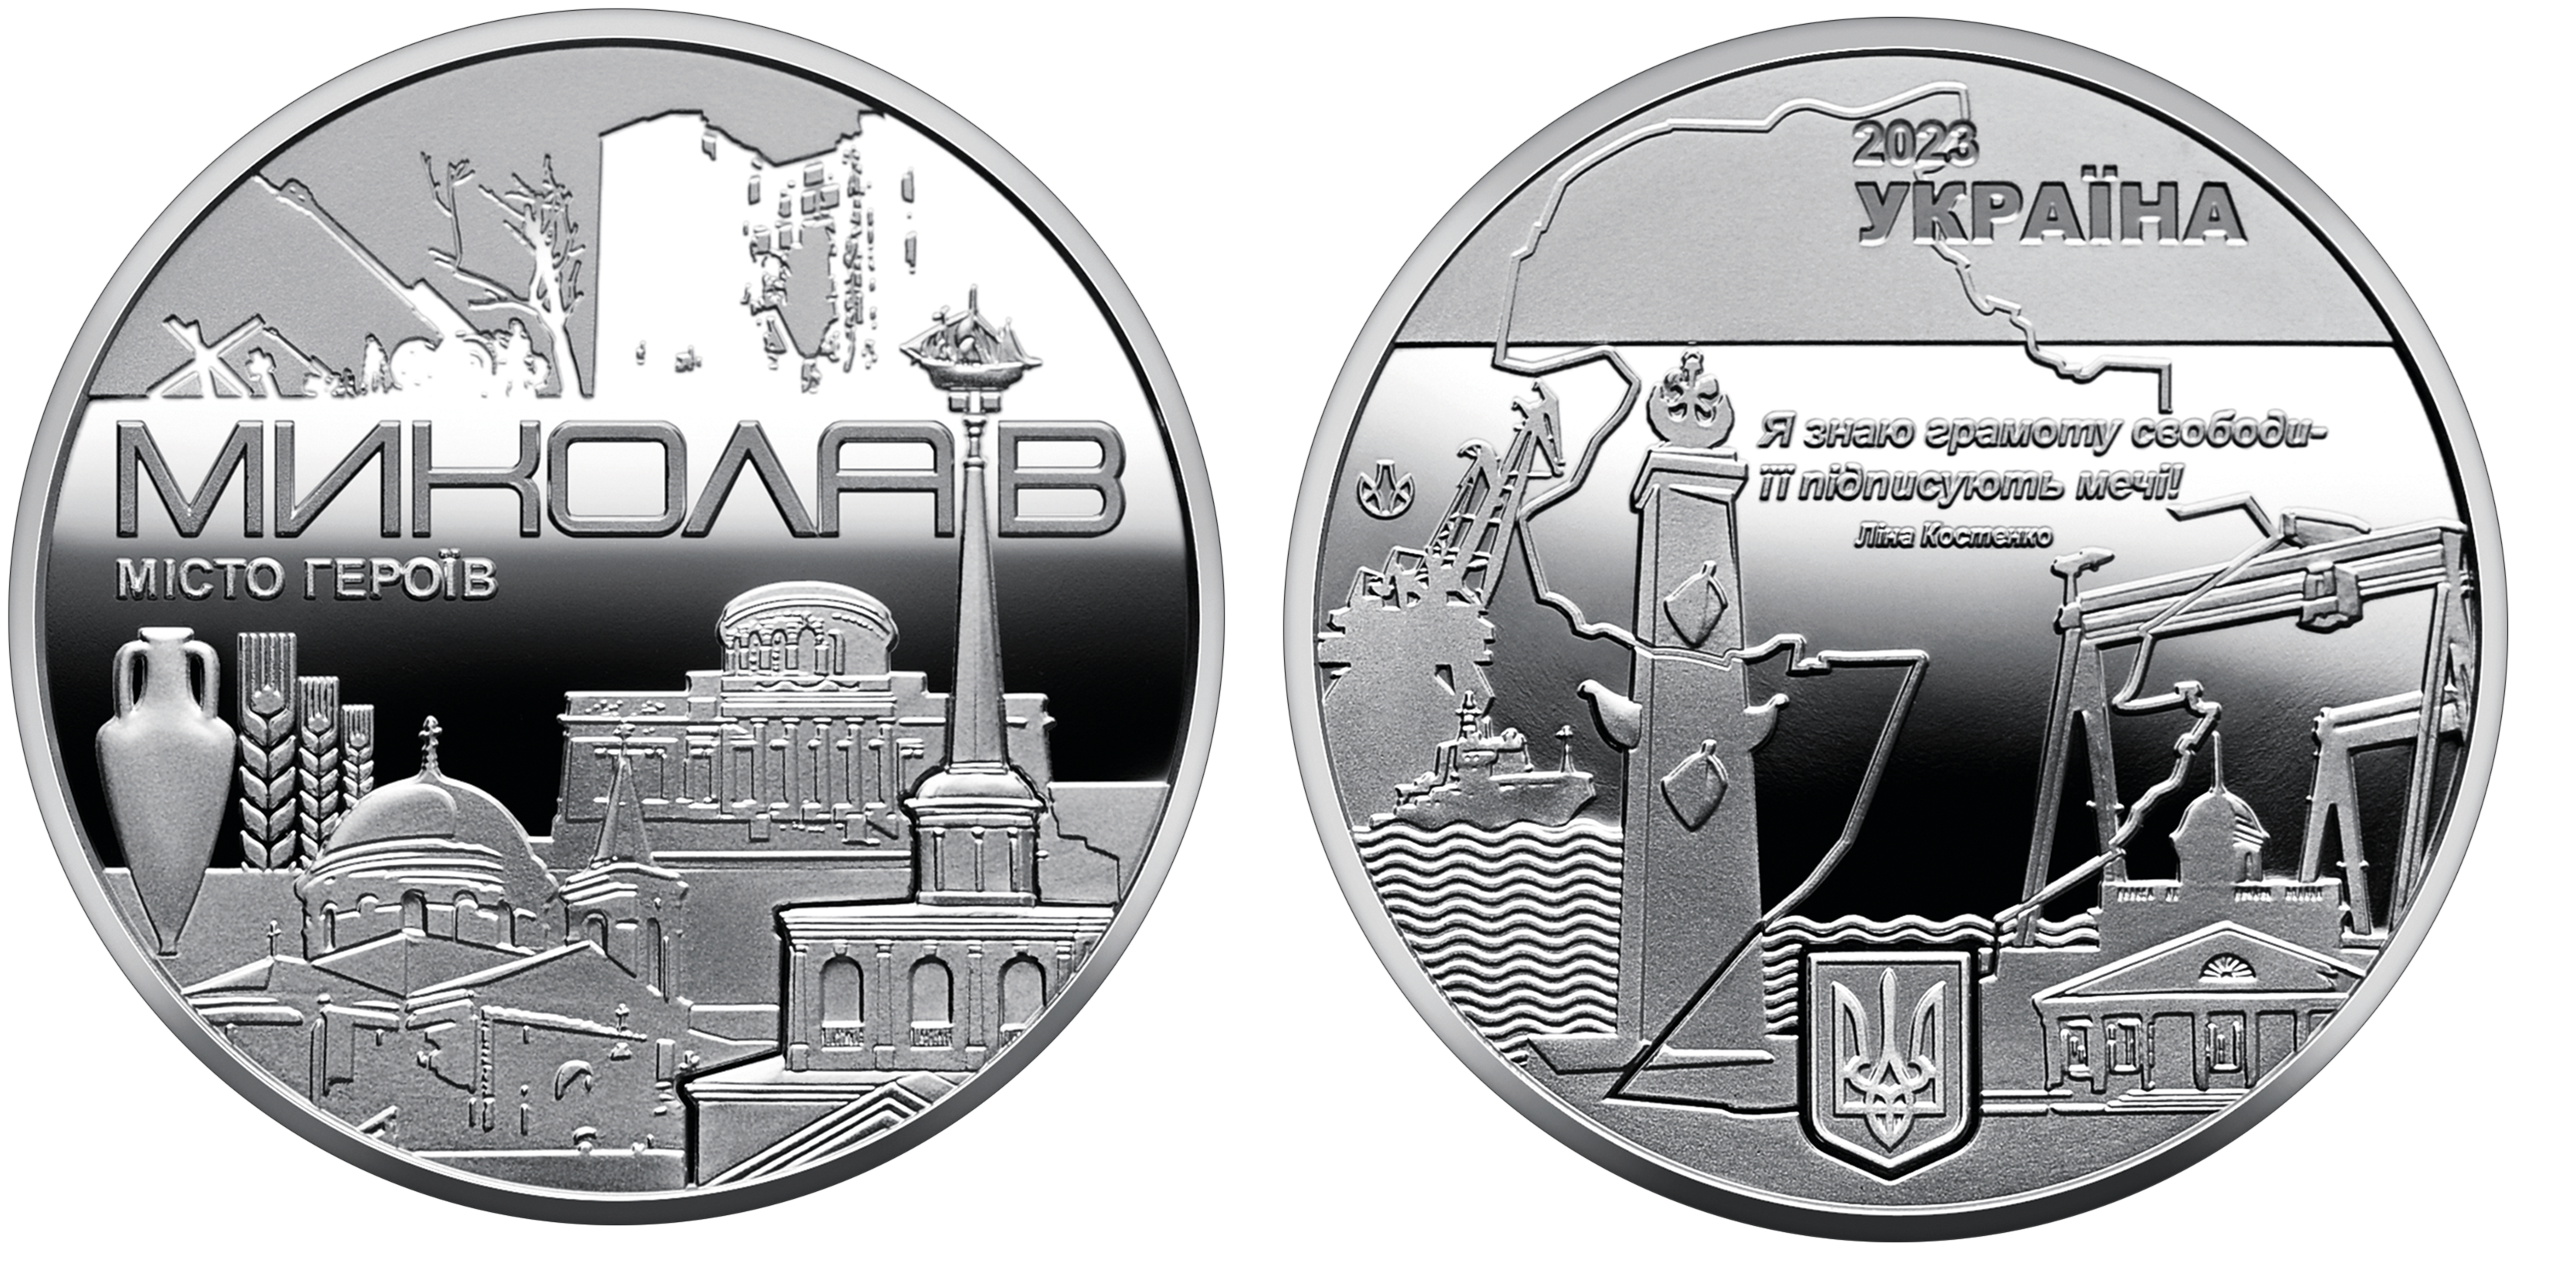 Sale of commemorative coins from MTB BANK • buy commemorative coins in Ukraine at MTB BANK - photo 2 - mtb.ua